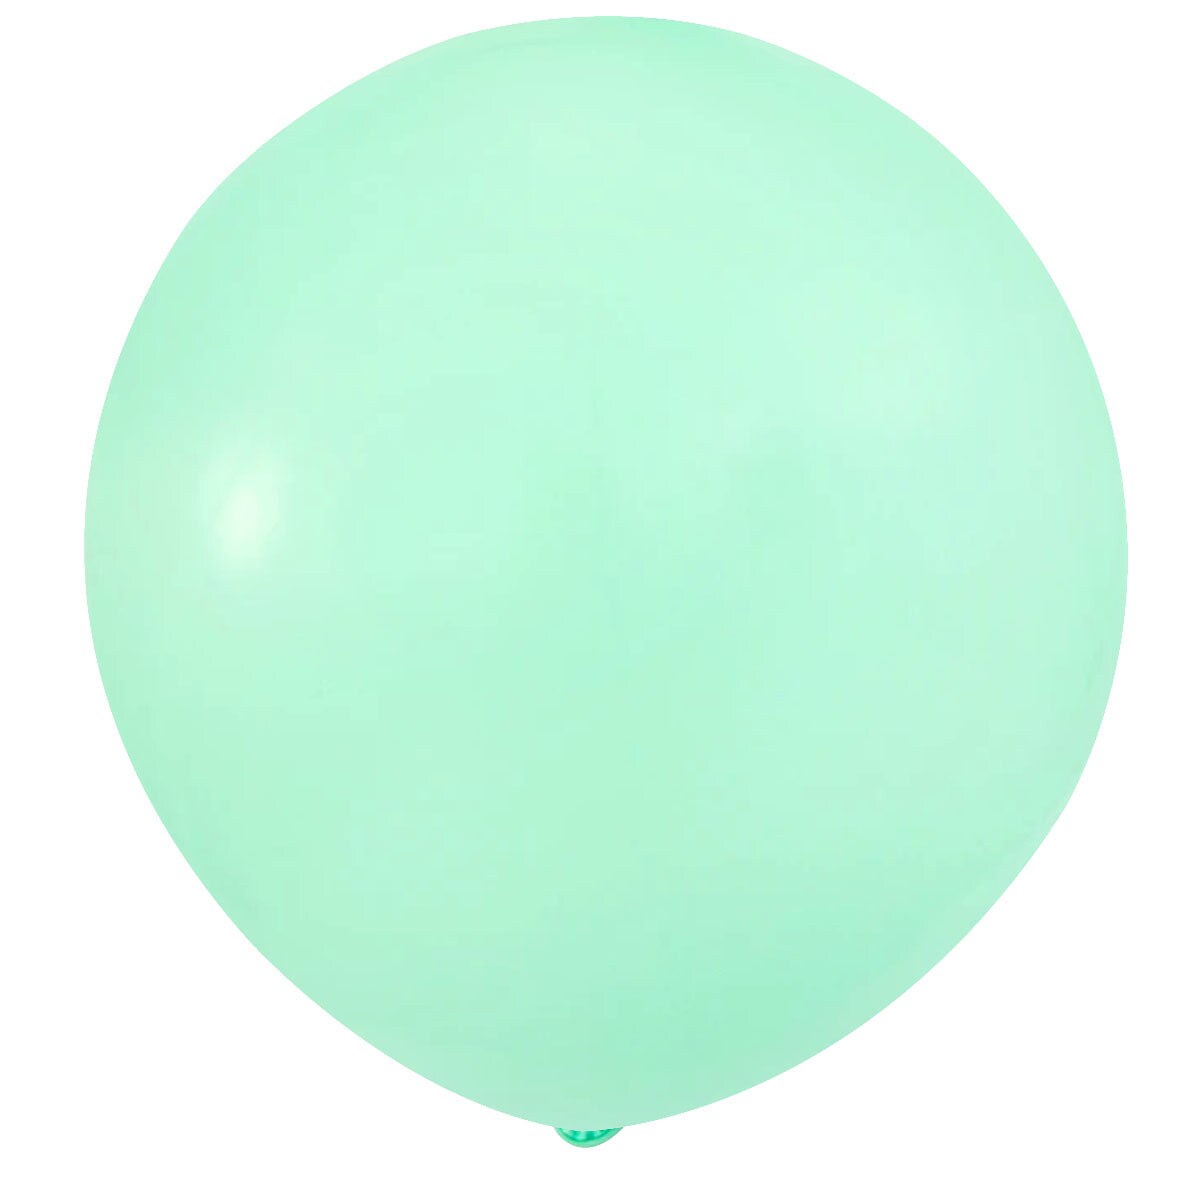 Wrapables 18 Inch Latex Balloons (10 Pack), Ice Blue